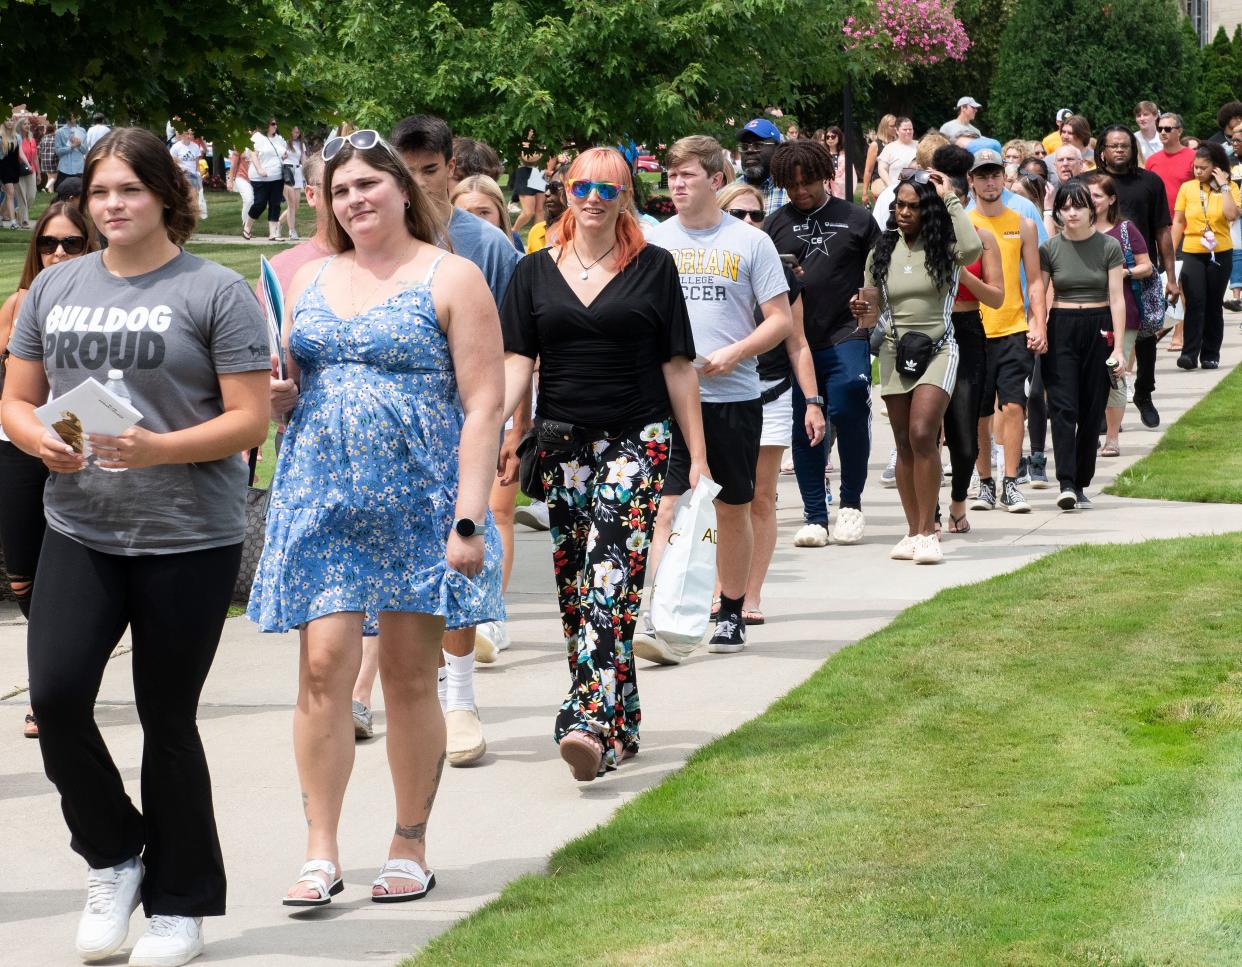 Adrian College’s campus was bustling with 1,200 visitors and 425 new students during the college’s annual Sneak Peek day, July 15. The event offers new and first-year students and their families a chance to check out campus accommodations and student life.